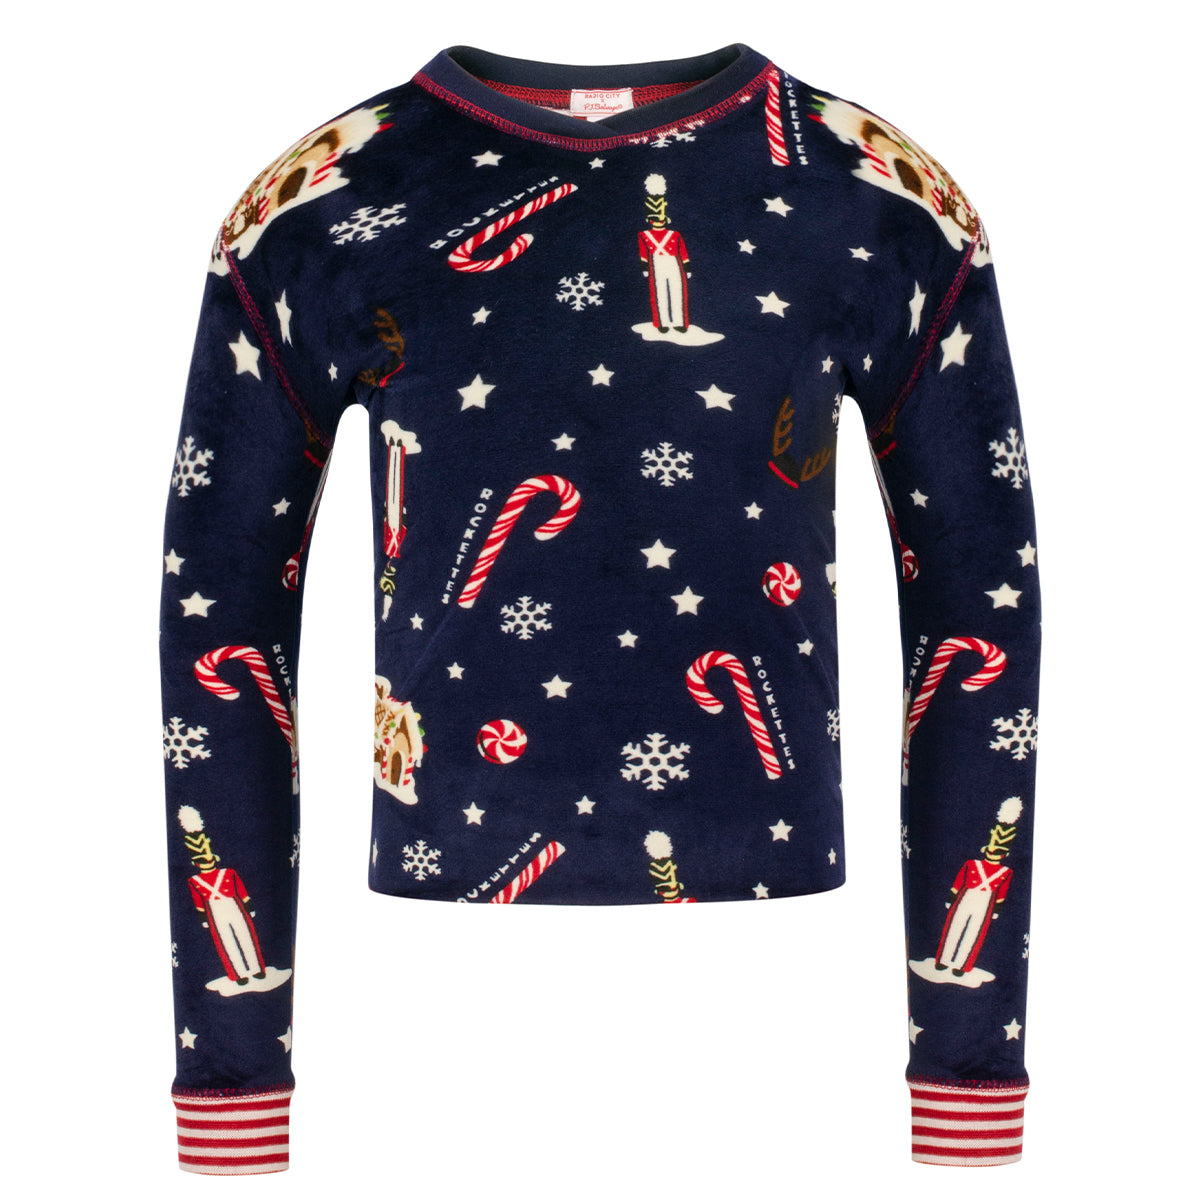 Blue Christmas pajamas top from front view with snowy print, candy-cane patterns and toy soldier design